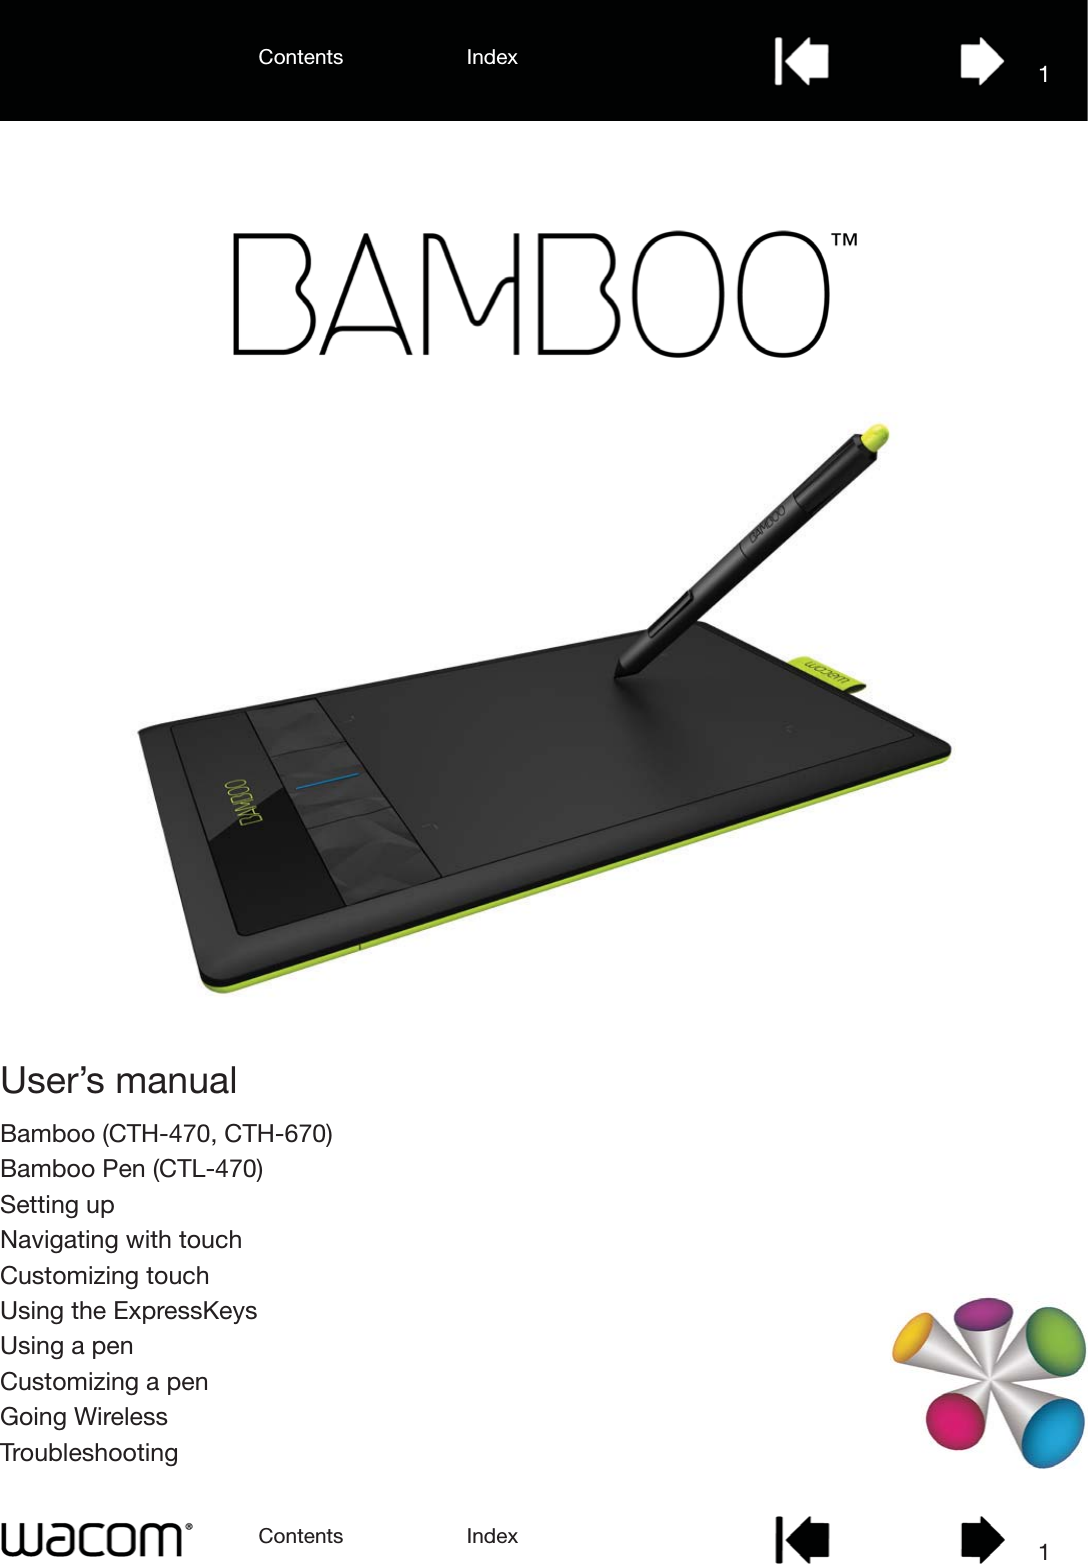 User’s manualBamboo (CTH-470, CTH-670)Bamboo Pen (CTL-470)Setting upNavigating with touchCustomizing touchUsing the ExpressKeysUsing a penCustomizing a penGoing WirelessTroubleshootingContents IndexContents 1Index1